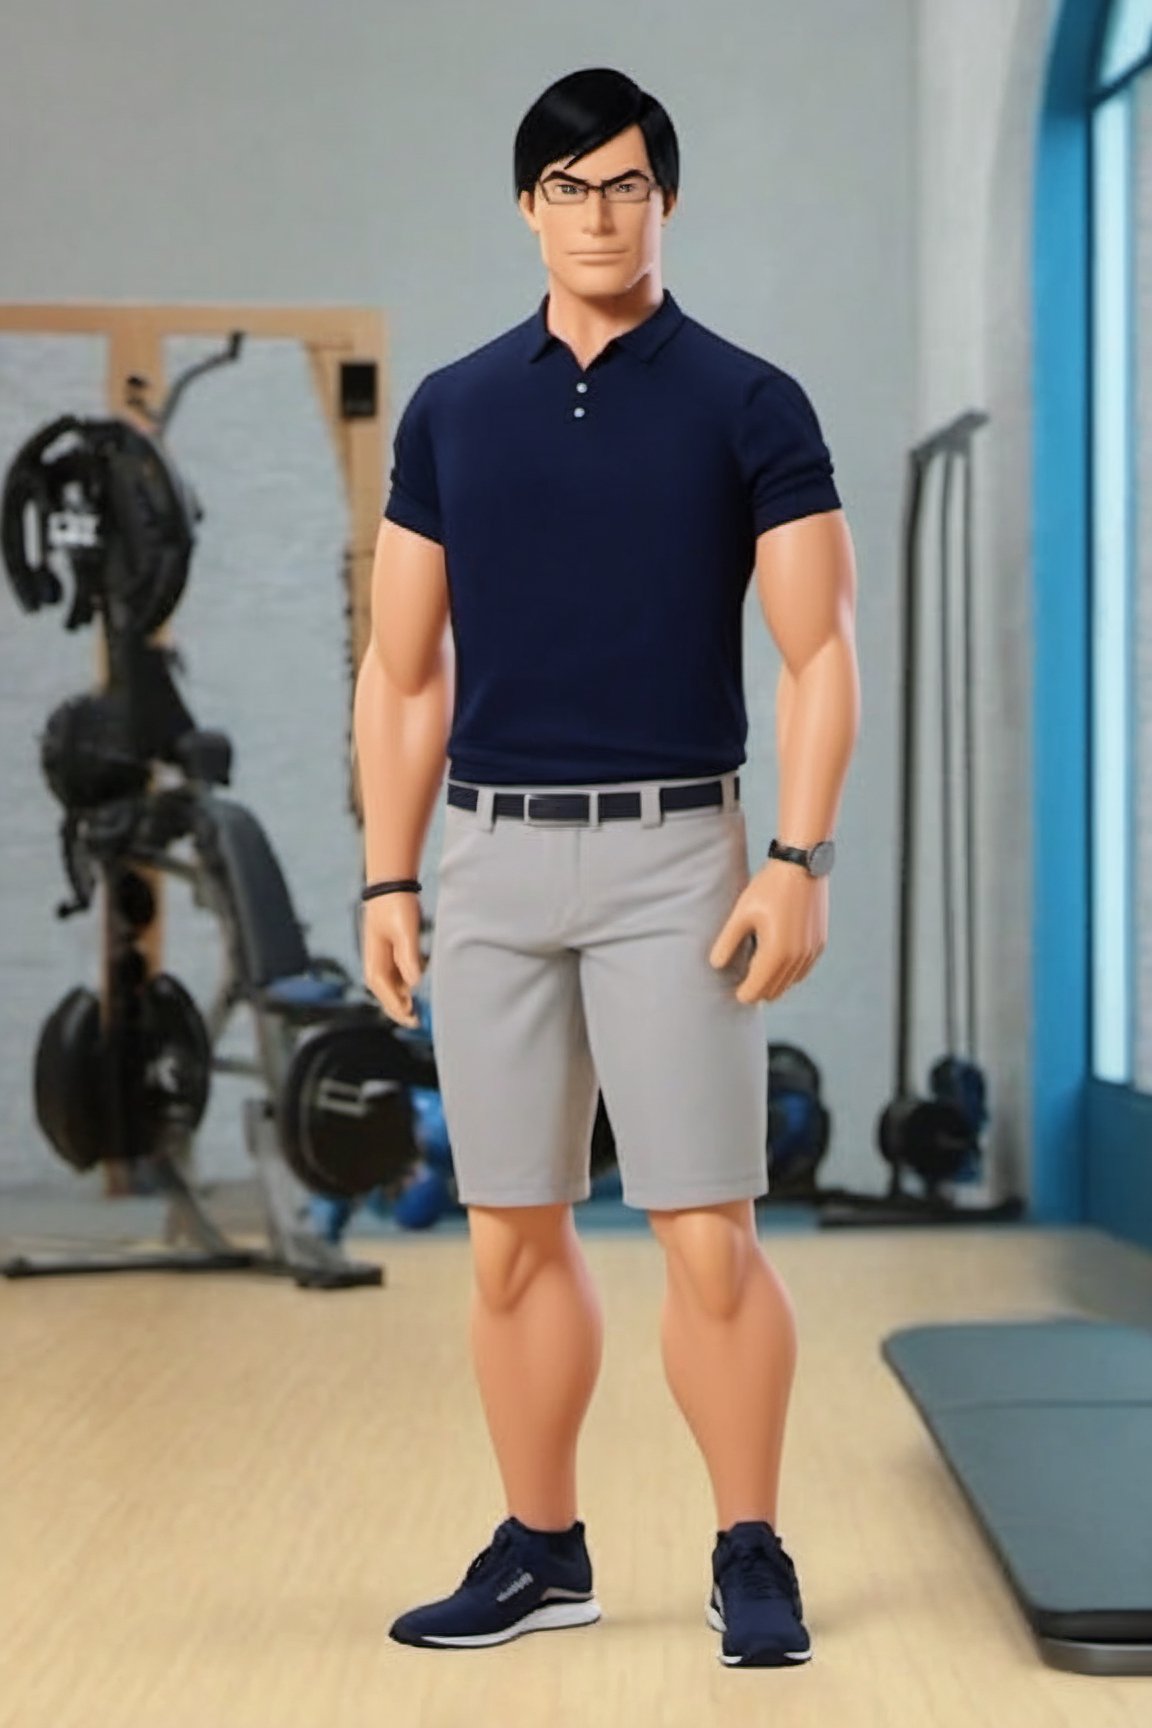 Realistic human like image of full body tenxiida character, serious male, black hair, wearing glasses, in casual clothing, background of gym